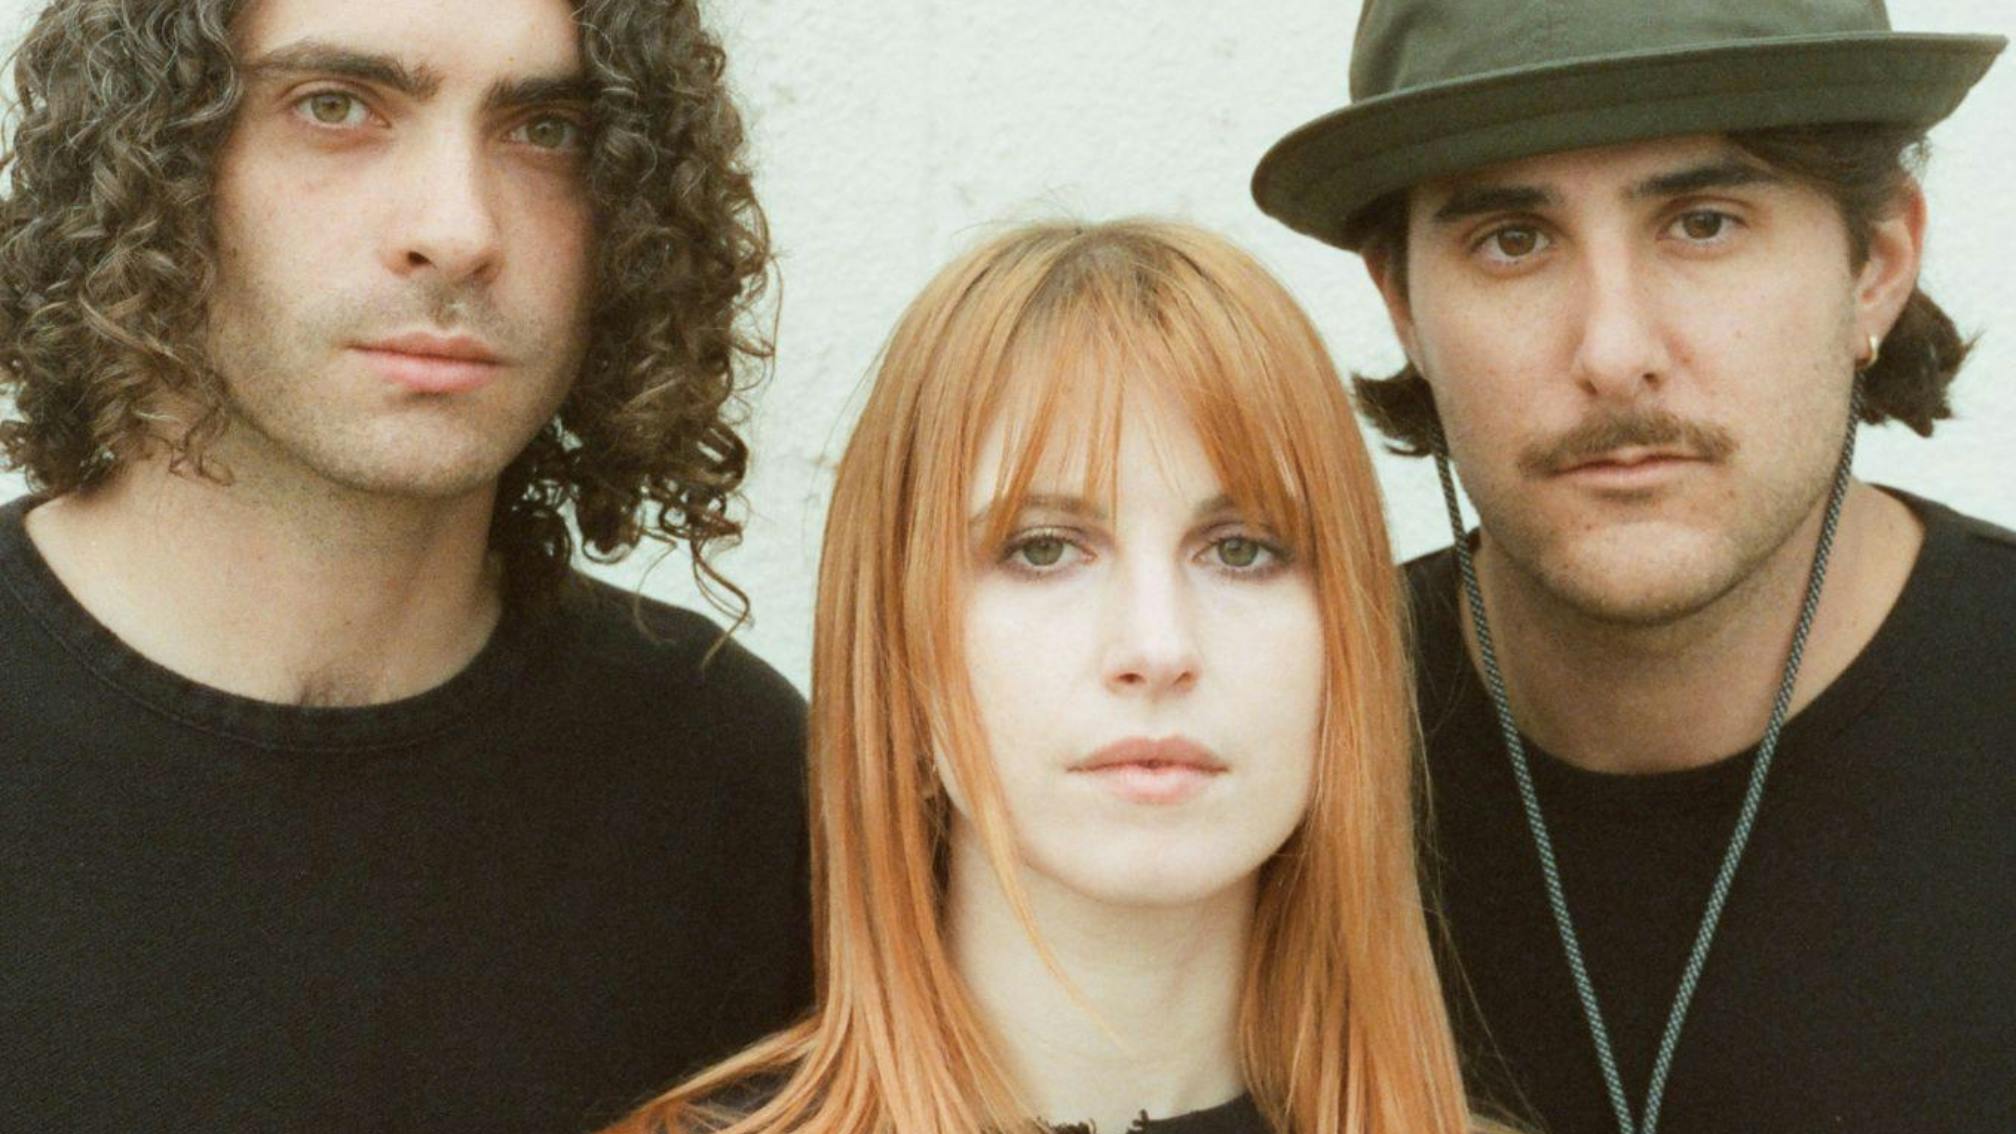 “It won’t be long”: Paramore are teasing a UK tour